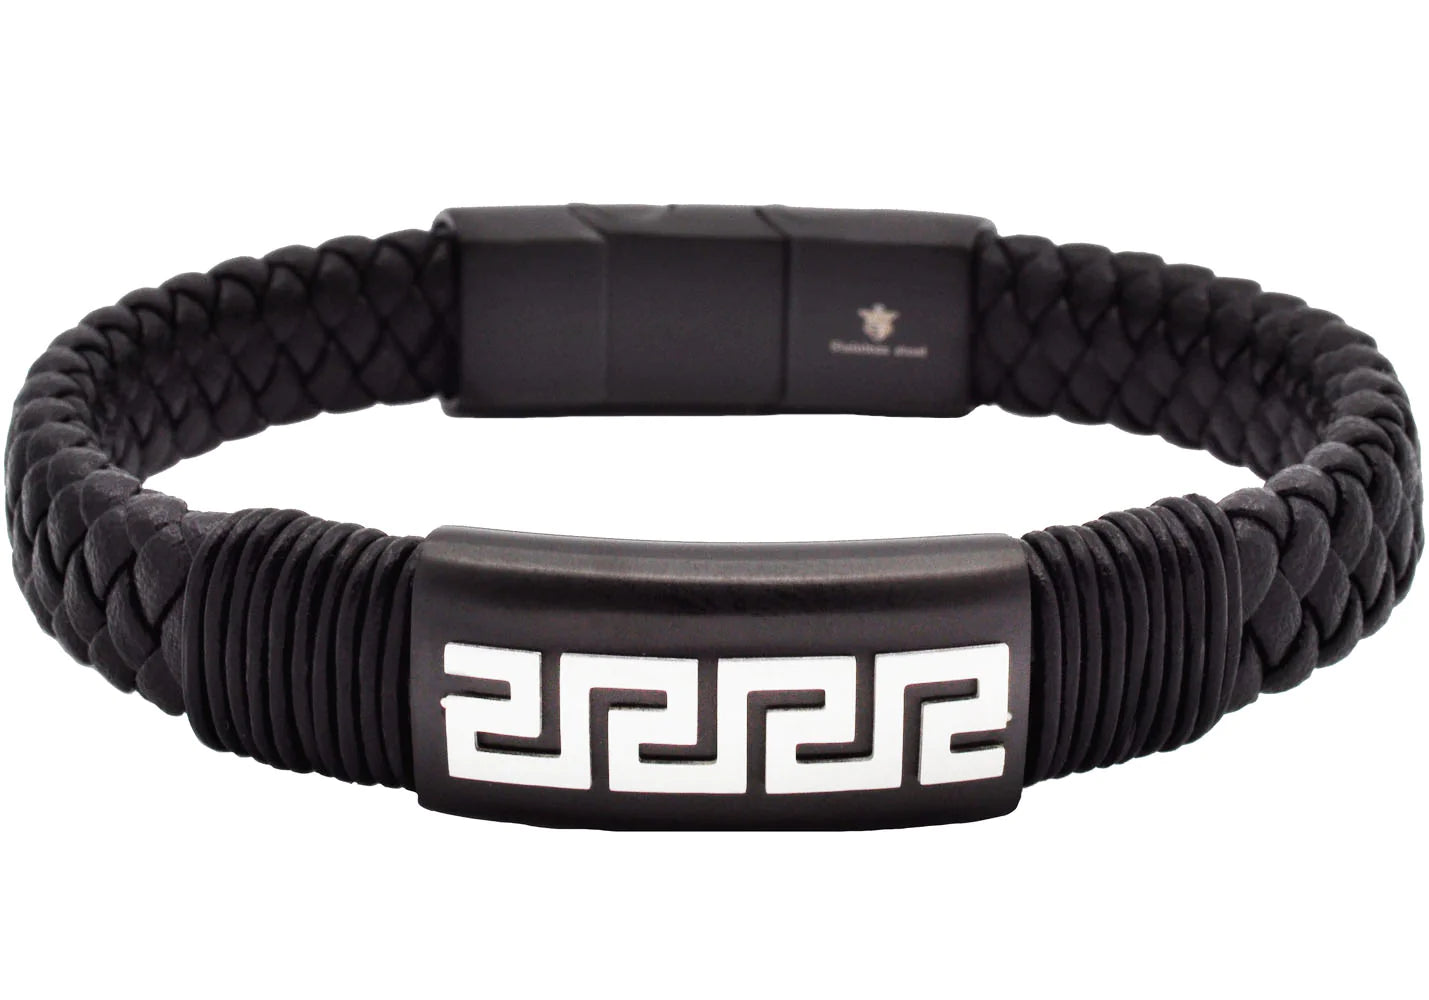 mens blackjack black leather bracelet, black-colored stainless steel greek key design on plaque. measures at 8.5 inches in length, .5 inches in width. 